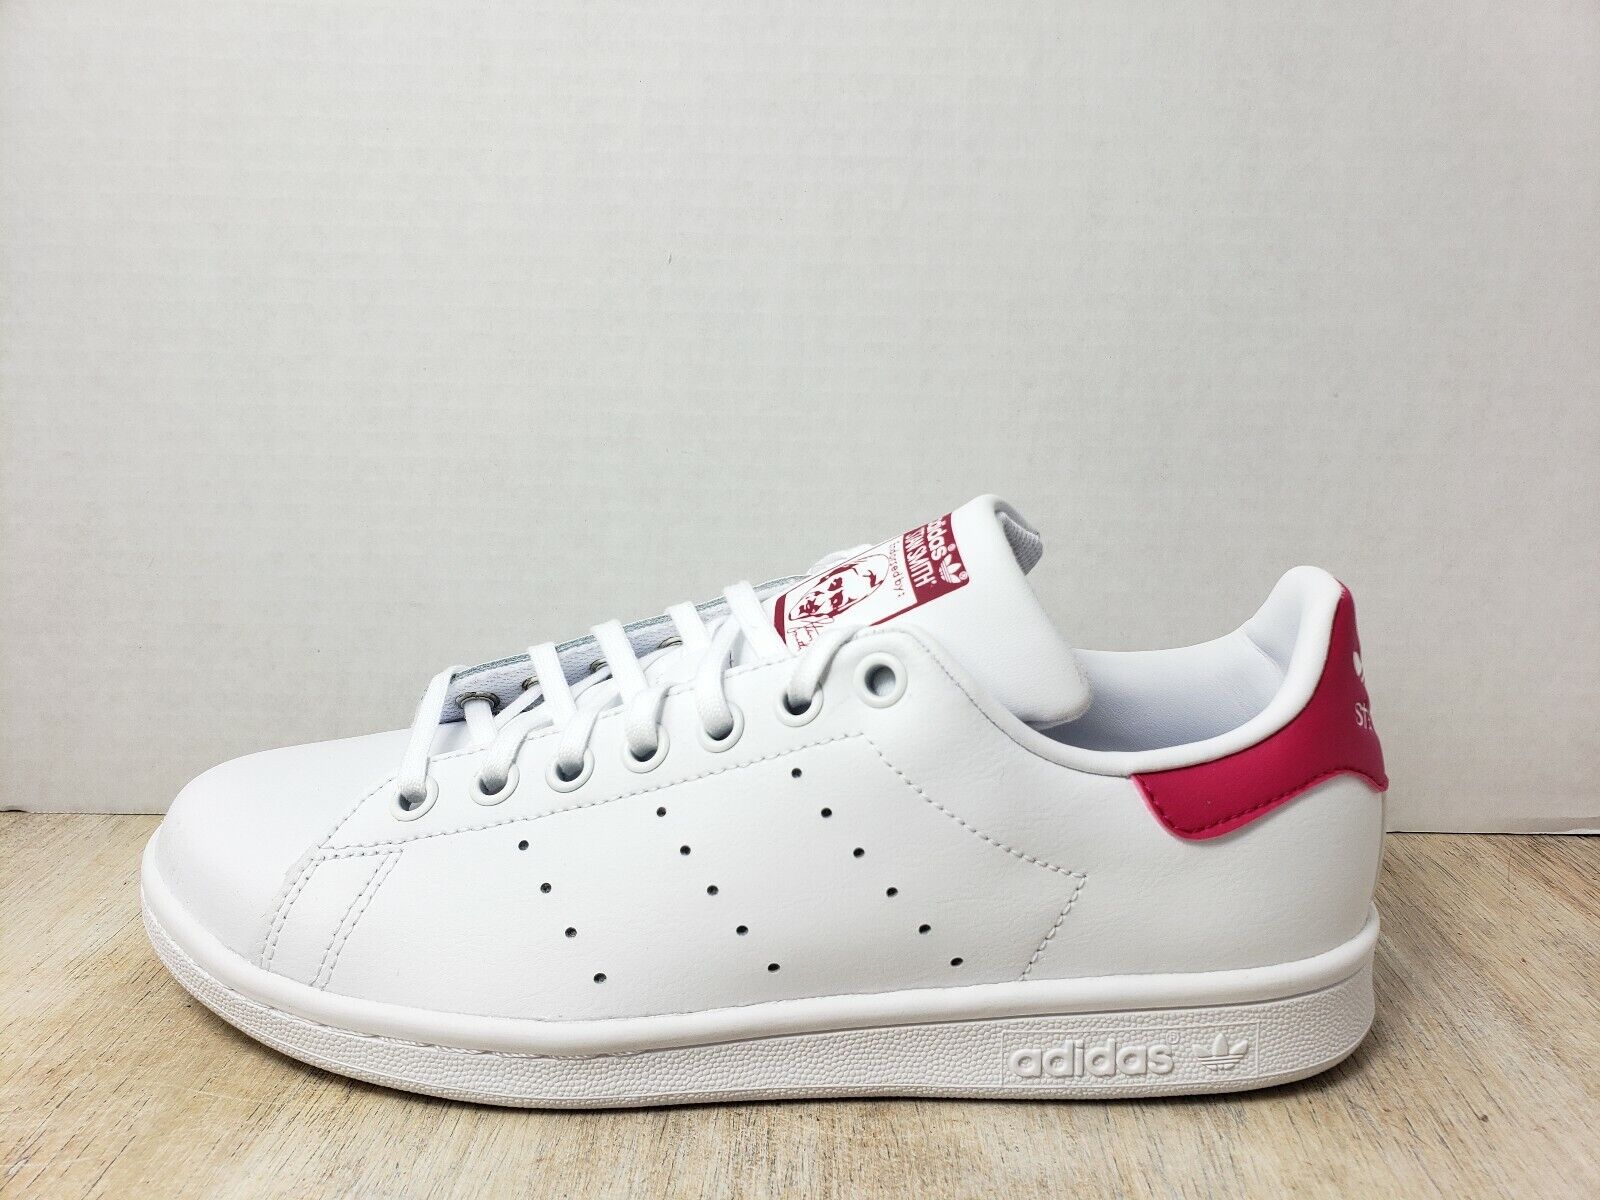 Adidas Stan Smith Big Shoes/Sneakers Pink [Size 6] B32703 | eBay